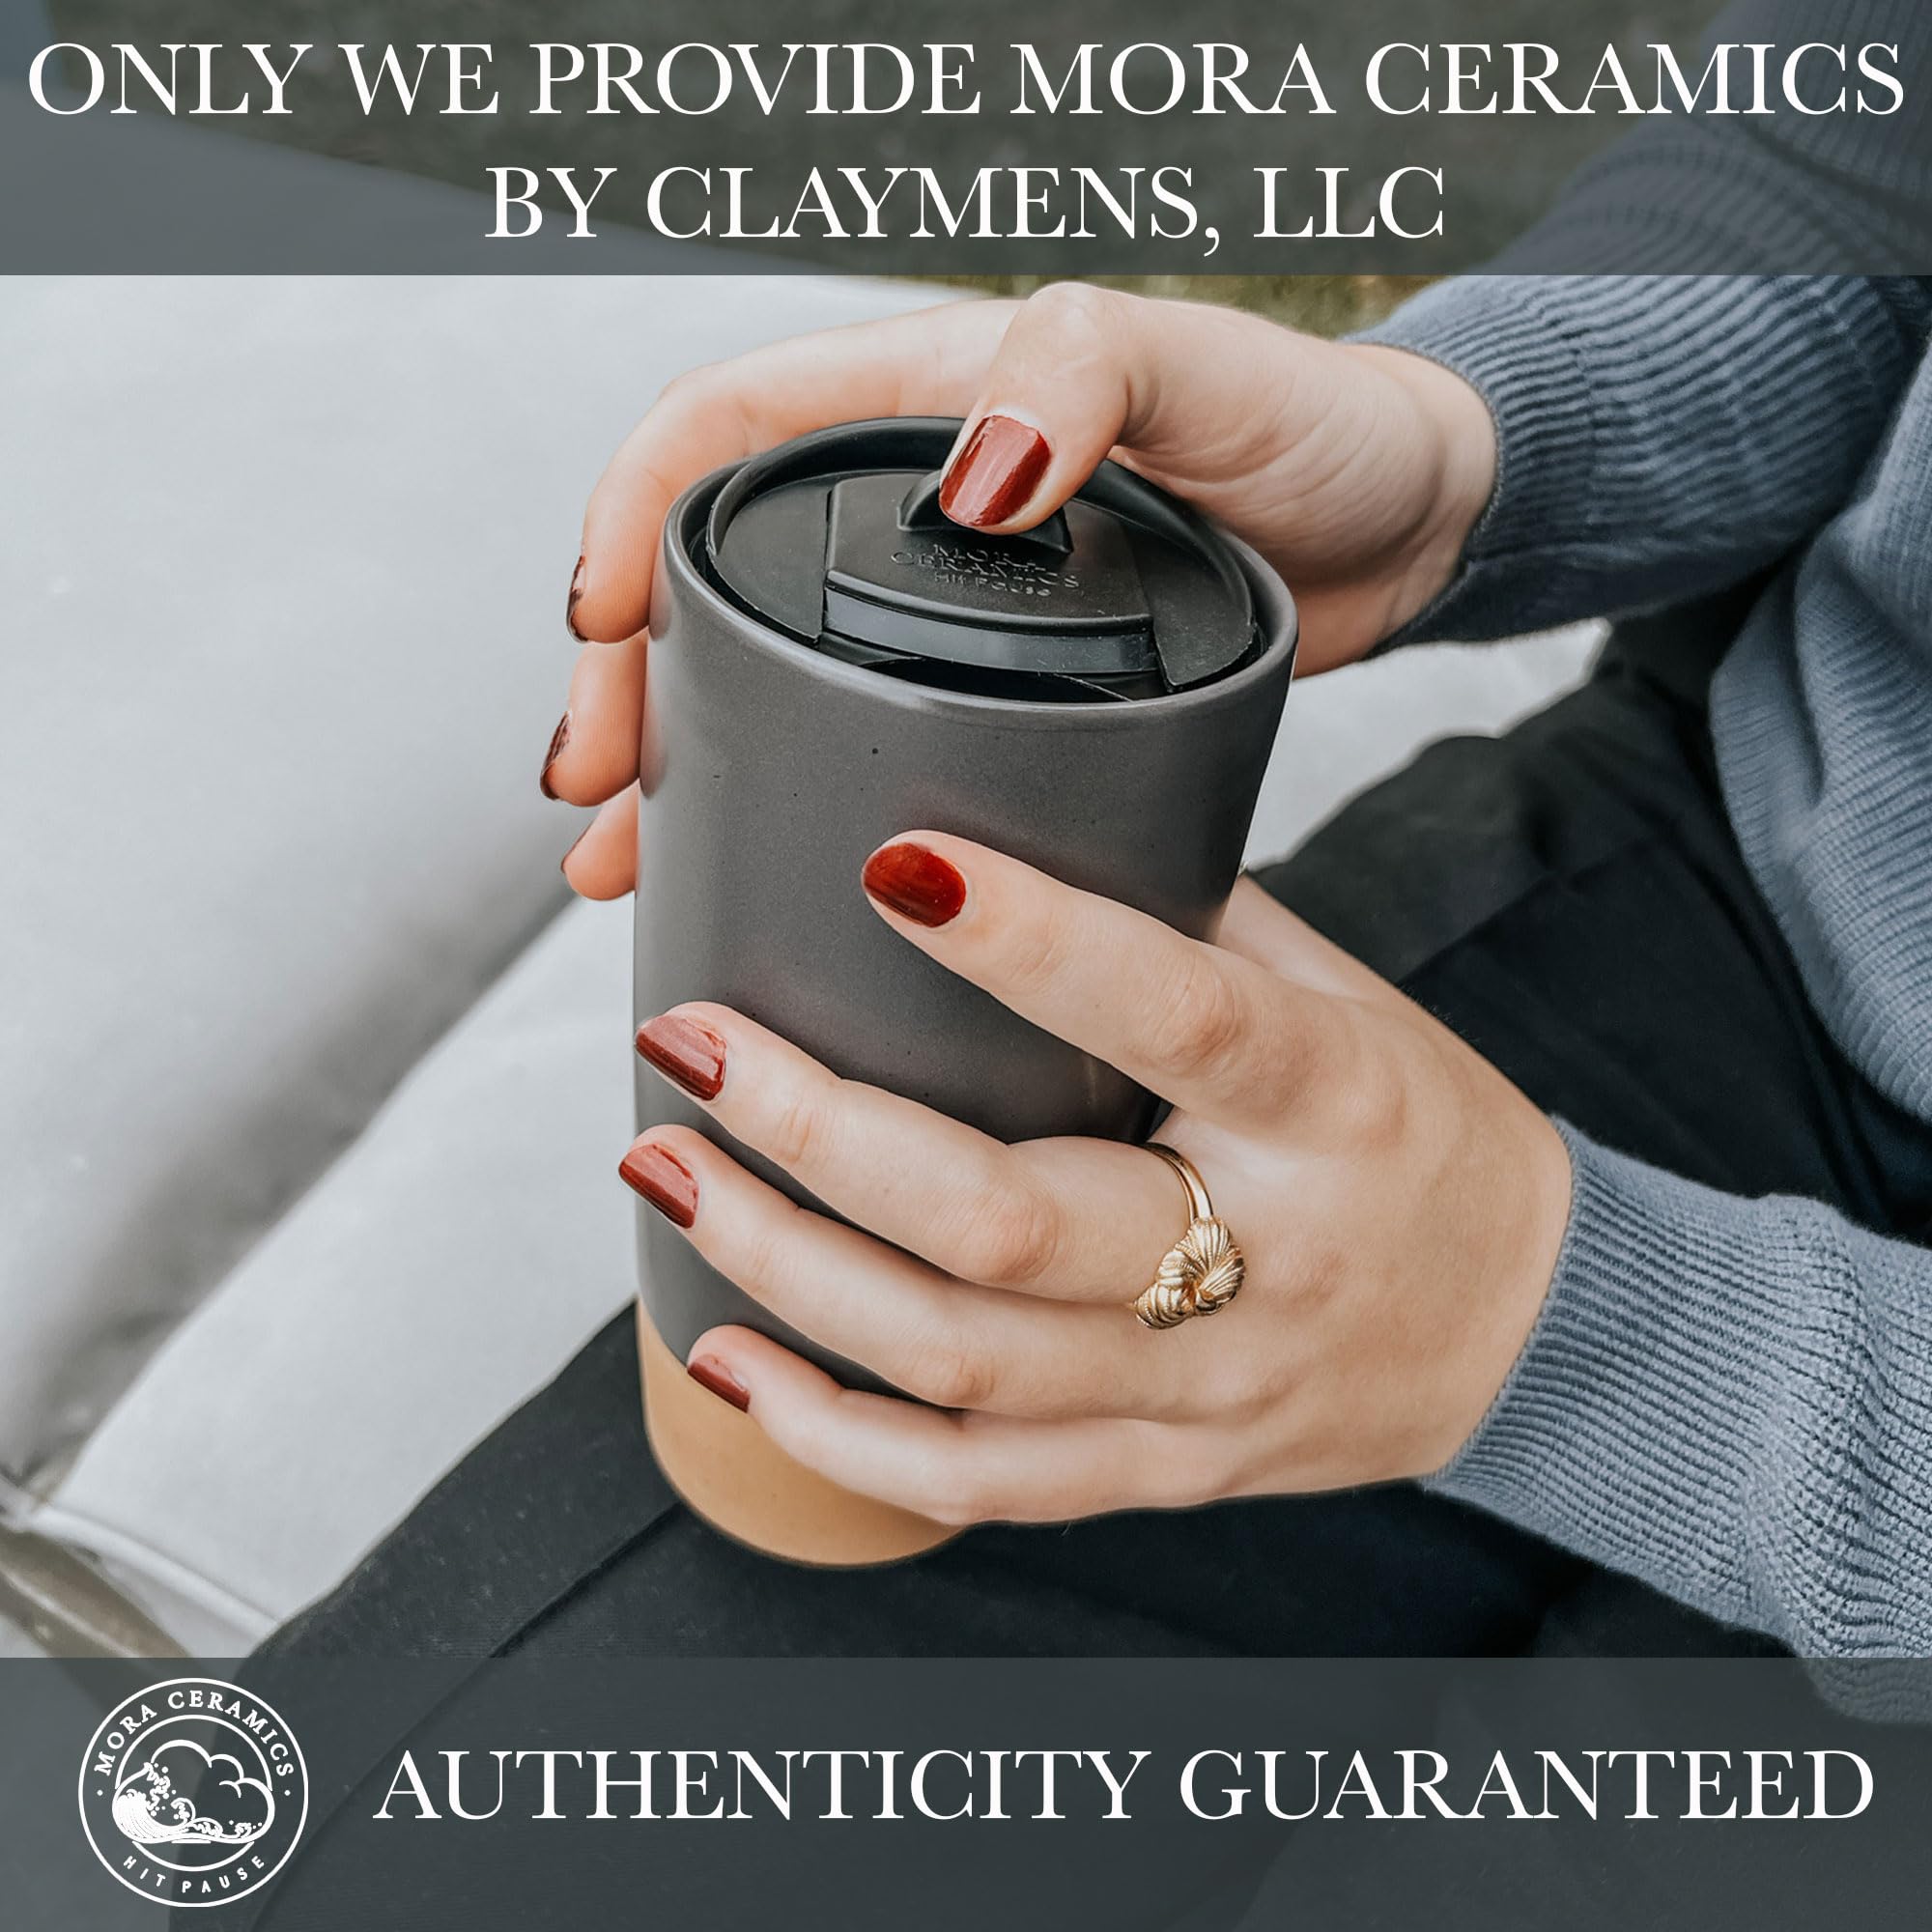 Mora Double Wall Ceramic Coffee Travel Mug with Lid, 14 oz, Portable, Microwave, Dishwasher Safe, Insulated Reusable Tall Cup, Splash Resistant Lid - To Go Tumbler for Car Cup Holder, Nightwaves